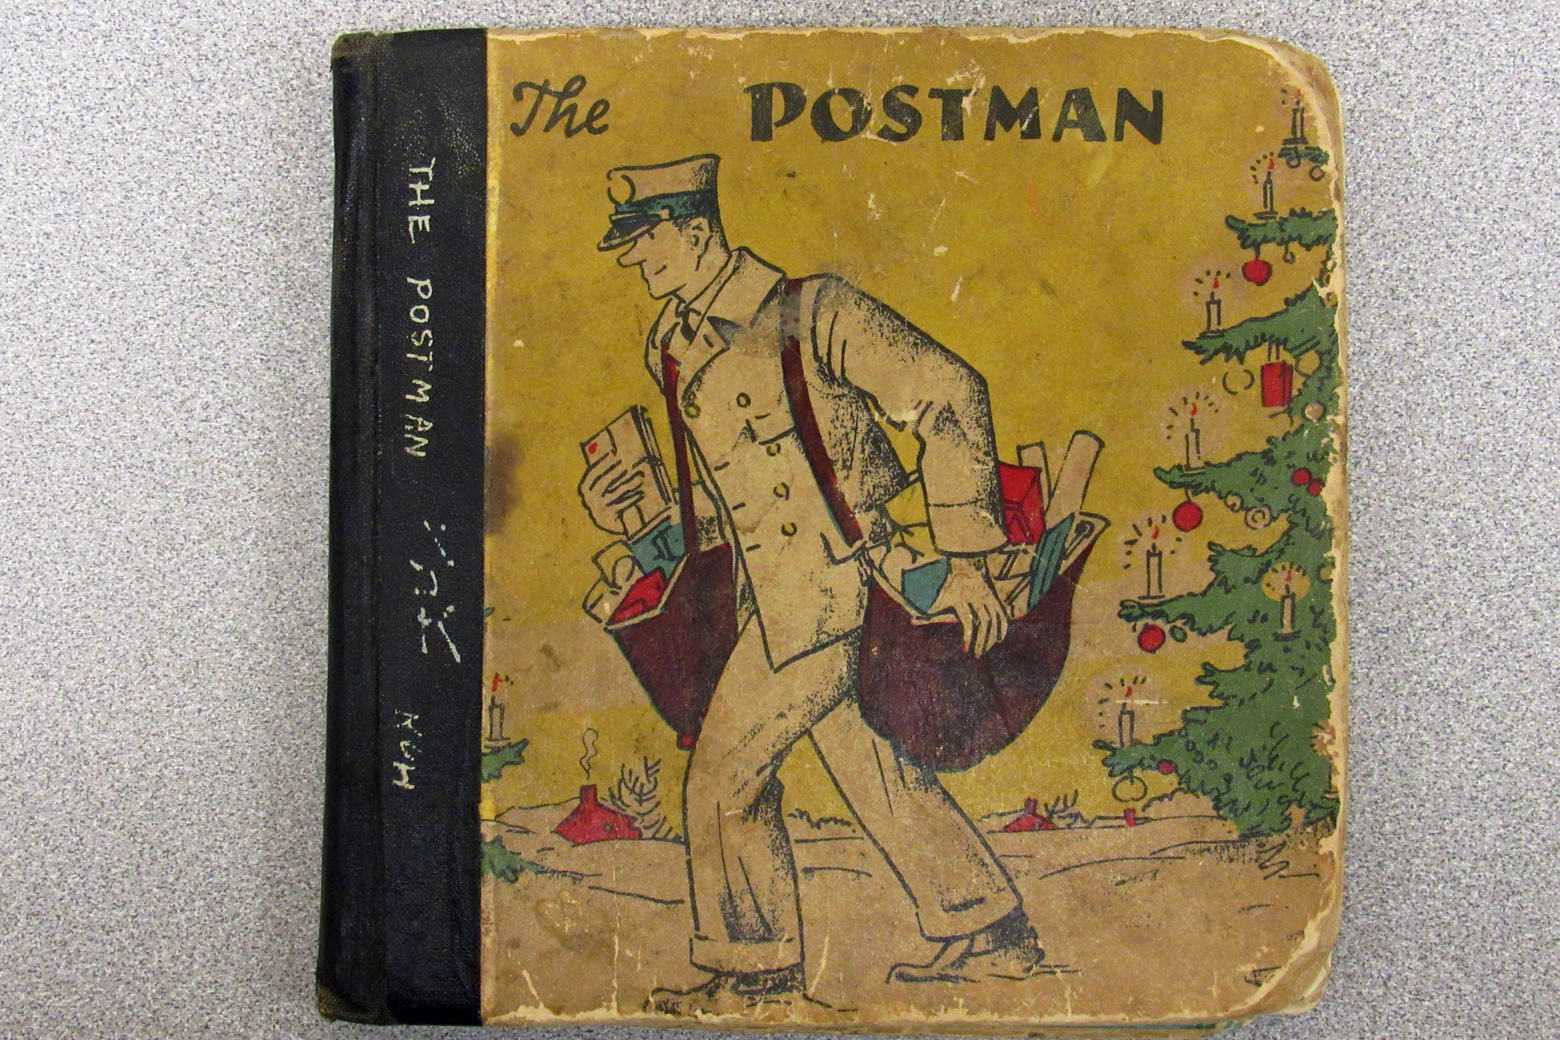 "The Postman" by Charlotte Kuh and illustrated by Kurt Wiese was originally published in 1929. (Courtesy Montgomery County Public Library)